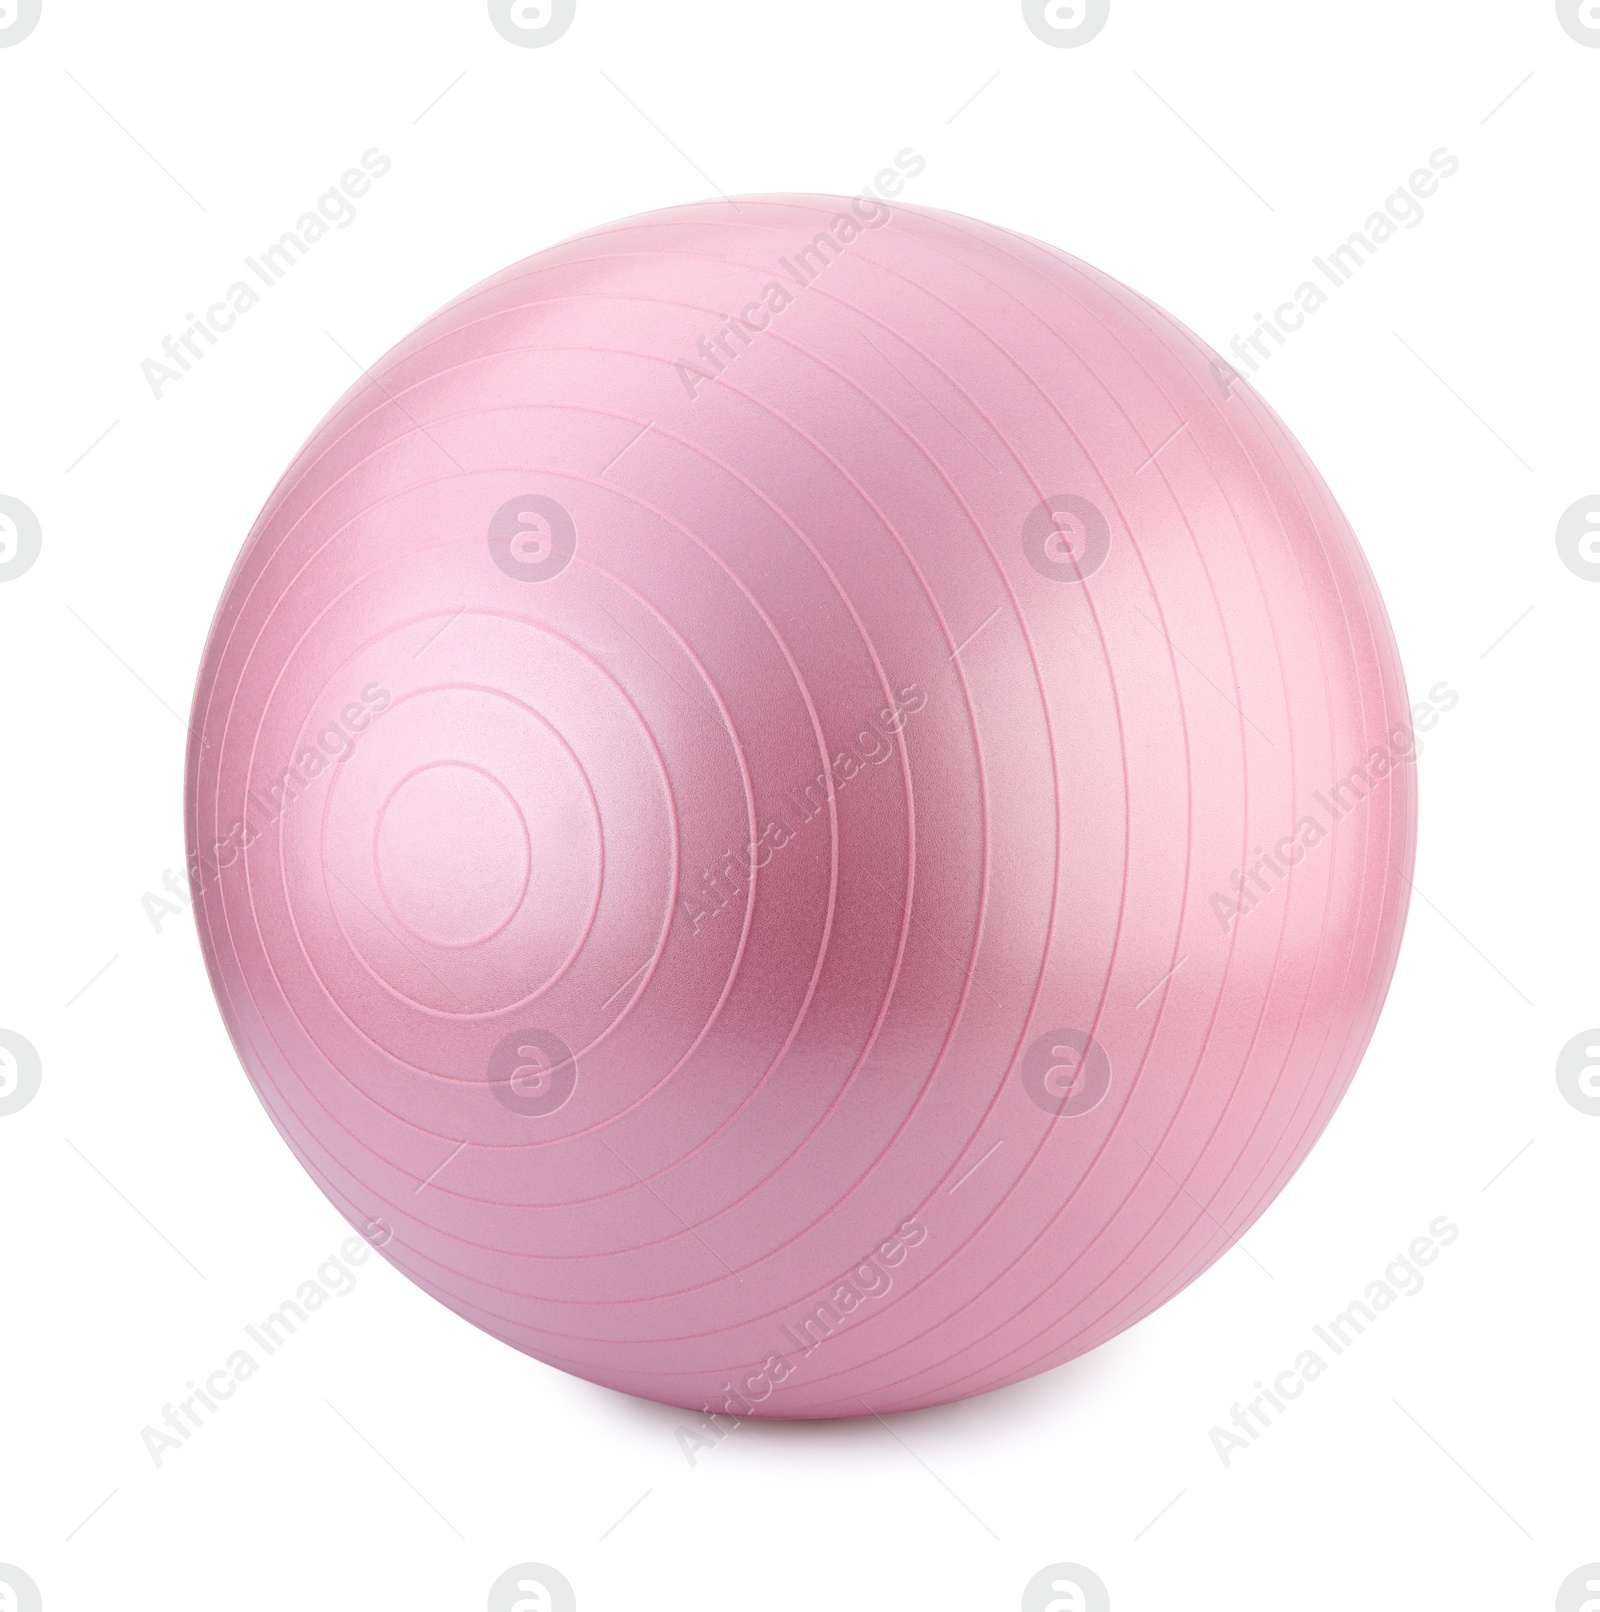 Photo of One pink fitness ball isolated on white. Sport equipment